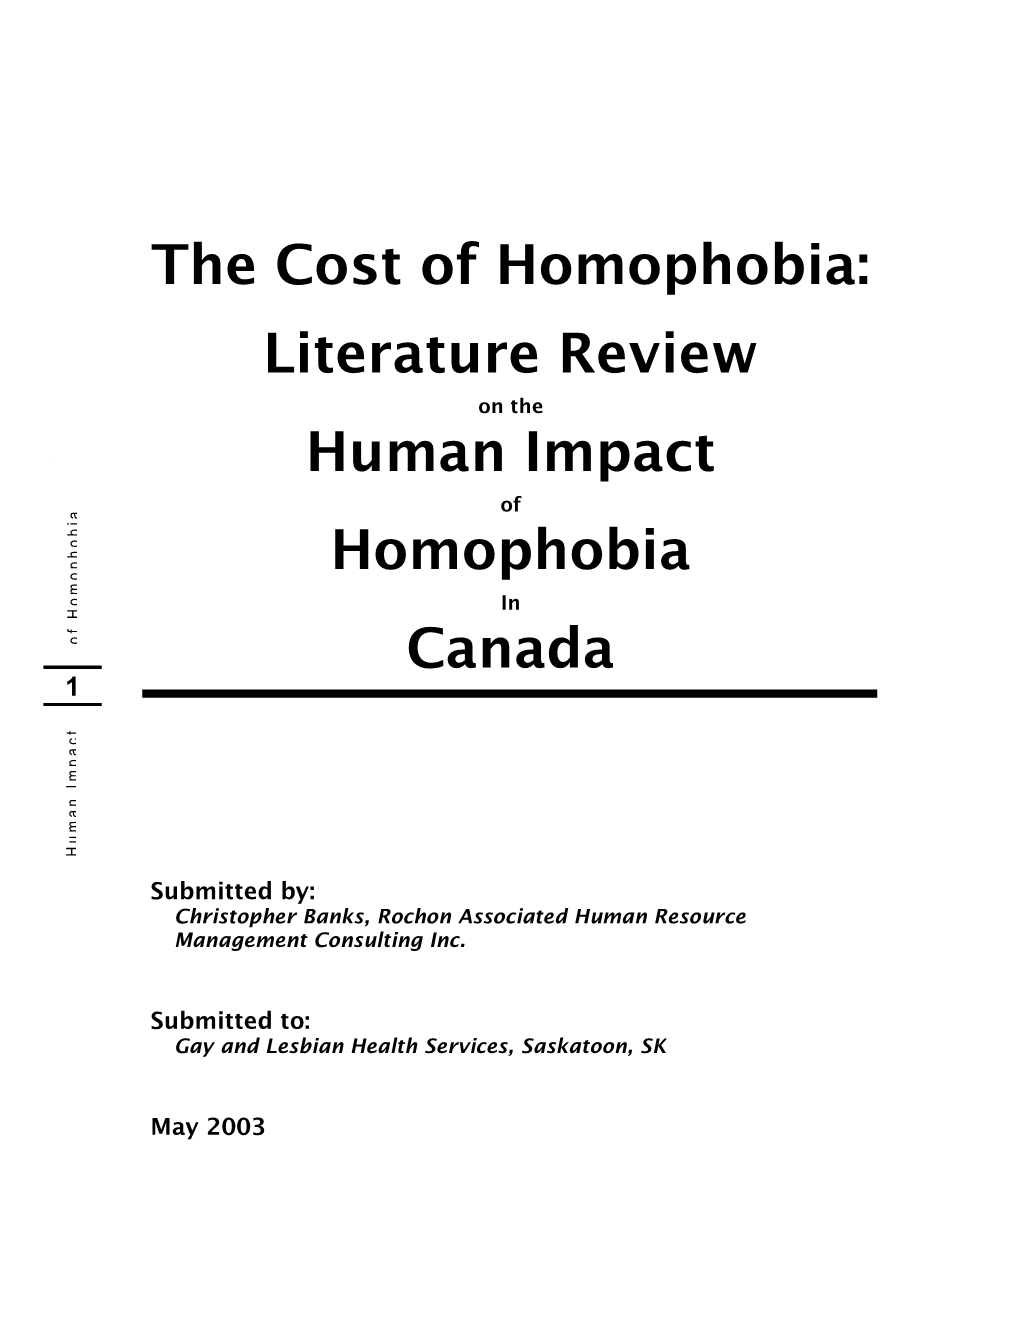 The Cost of Homophobia